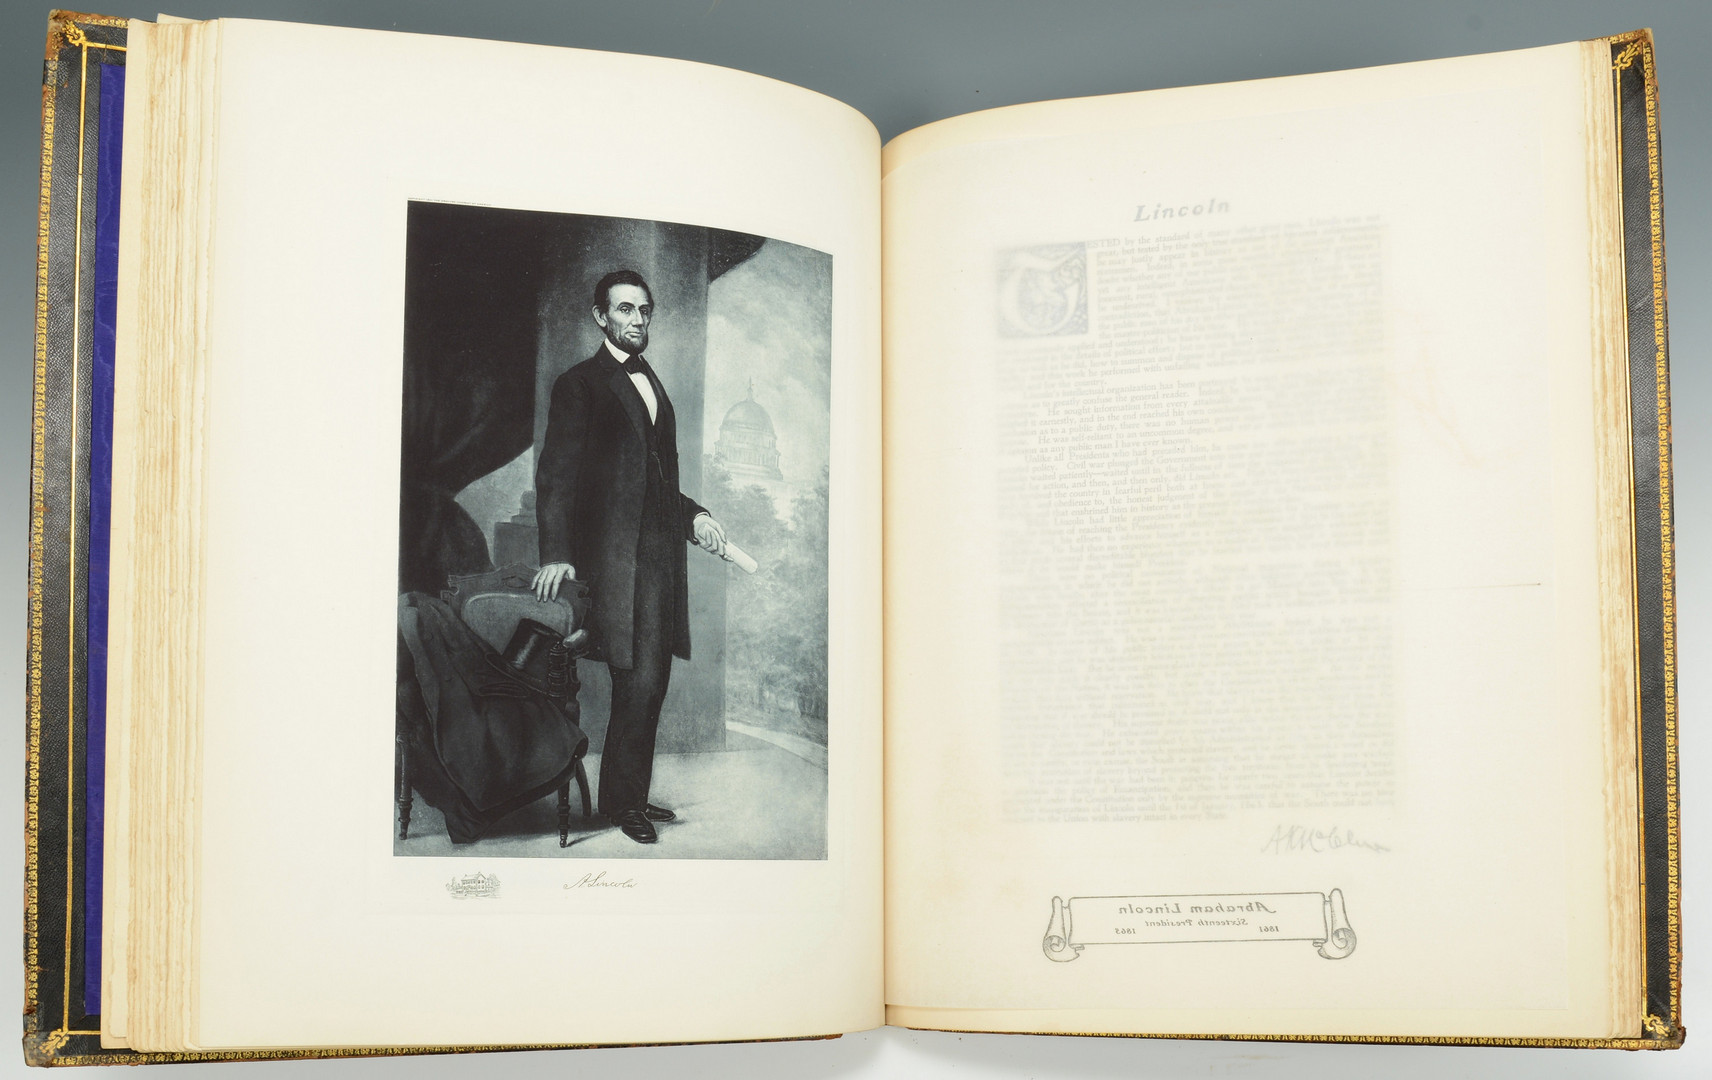 Lot 869: Large folio book, The Presidents